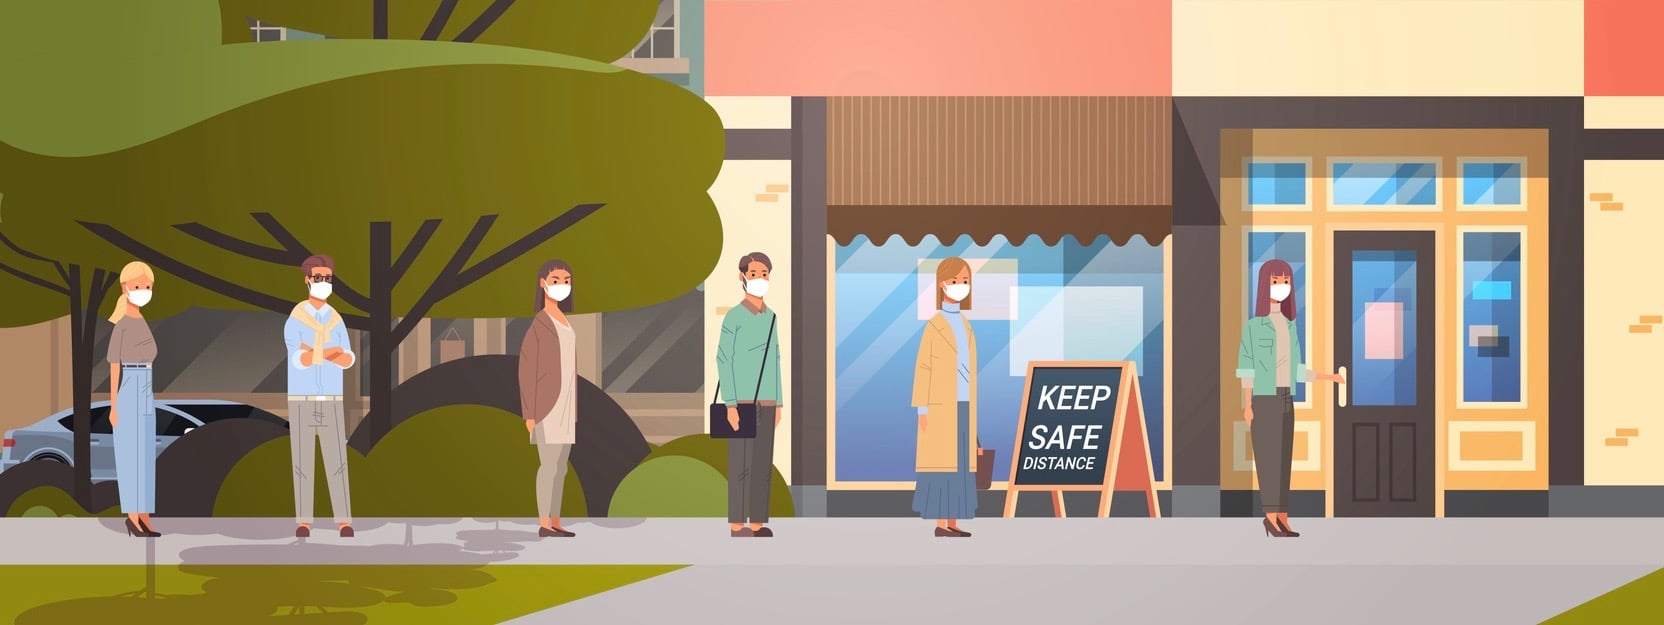 people in face masks standing line queue to coffee shop keeping distance to prevent covid-19 social distancing coronavirus pandemic health care concept horizontal full length vector illustration (people in face masks standing line queue to coffee shop